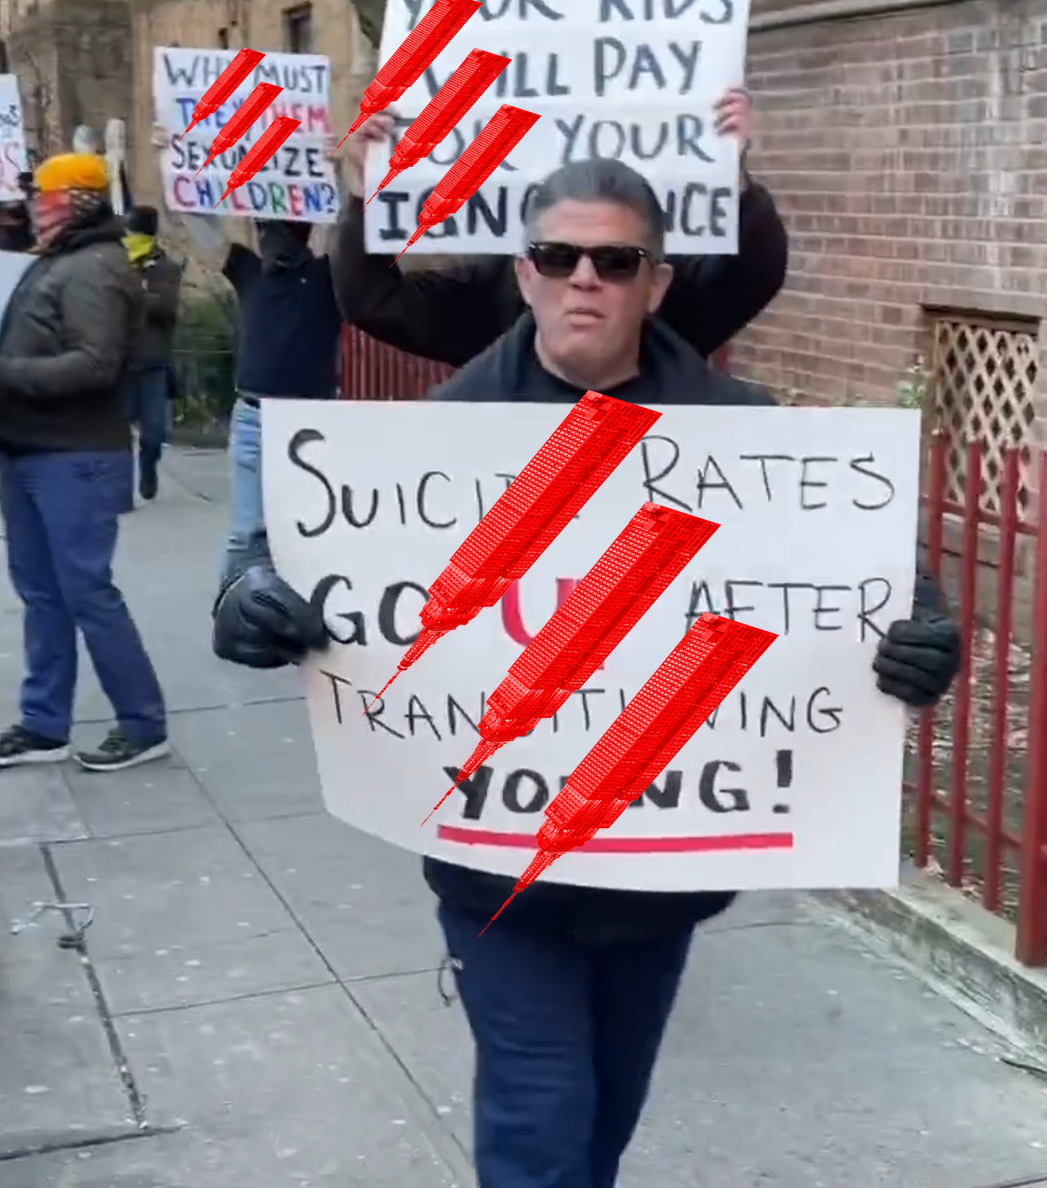 Tony Pagano in sunglasses at a DQSH protest in Jackson Heights. He's carrying a sign containing transphobic medical disinformation. Behind him are other Proud Boys on the sidewalk with similar signs. The other Proud Boys have masks on.